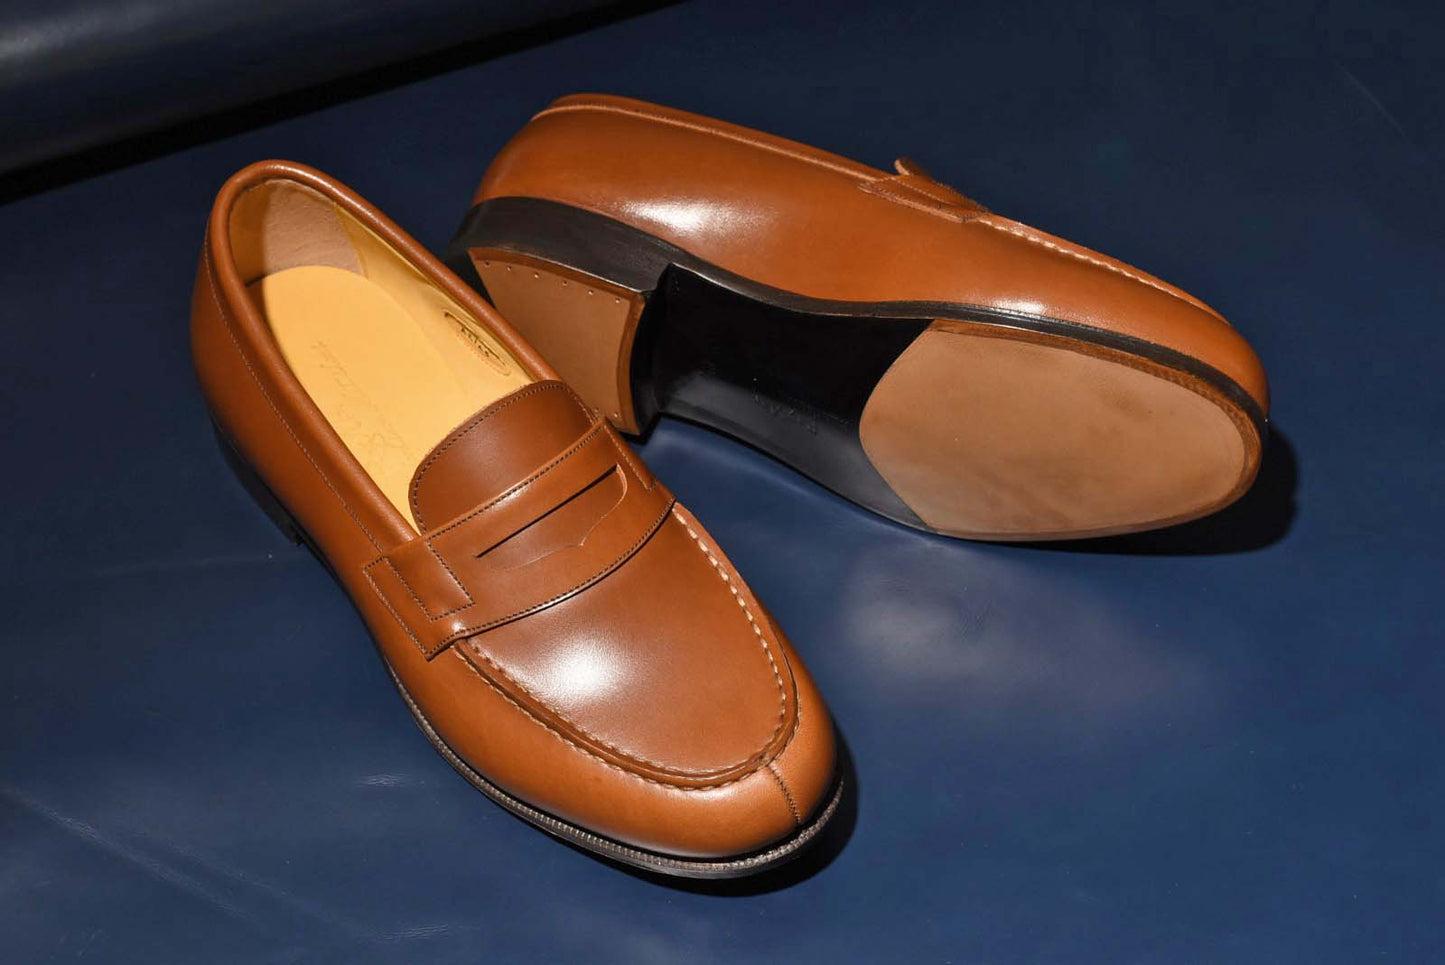 “Atlas” Penny Loafer, Brown Dress Shoes, Hand welted, US size 5 1/2 ~ 10